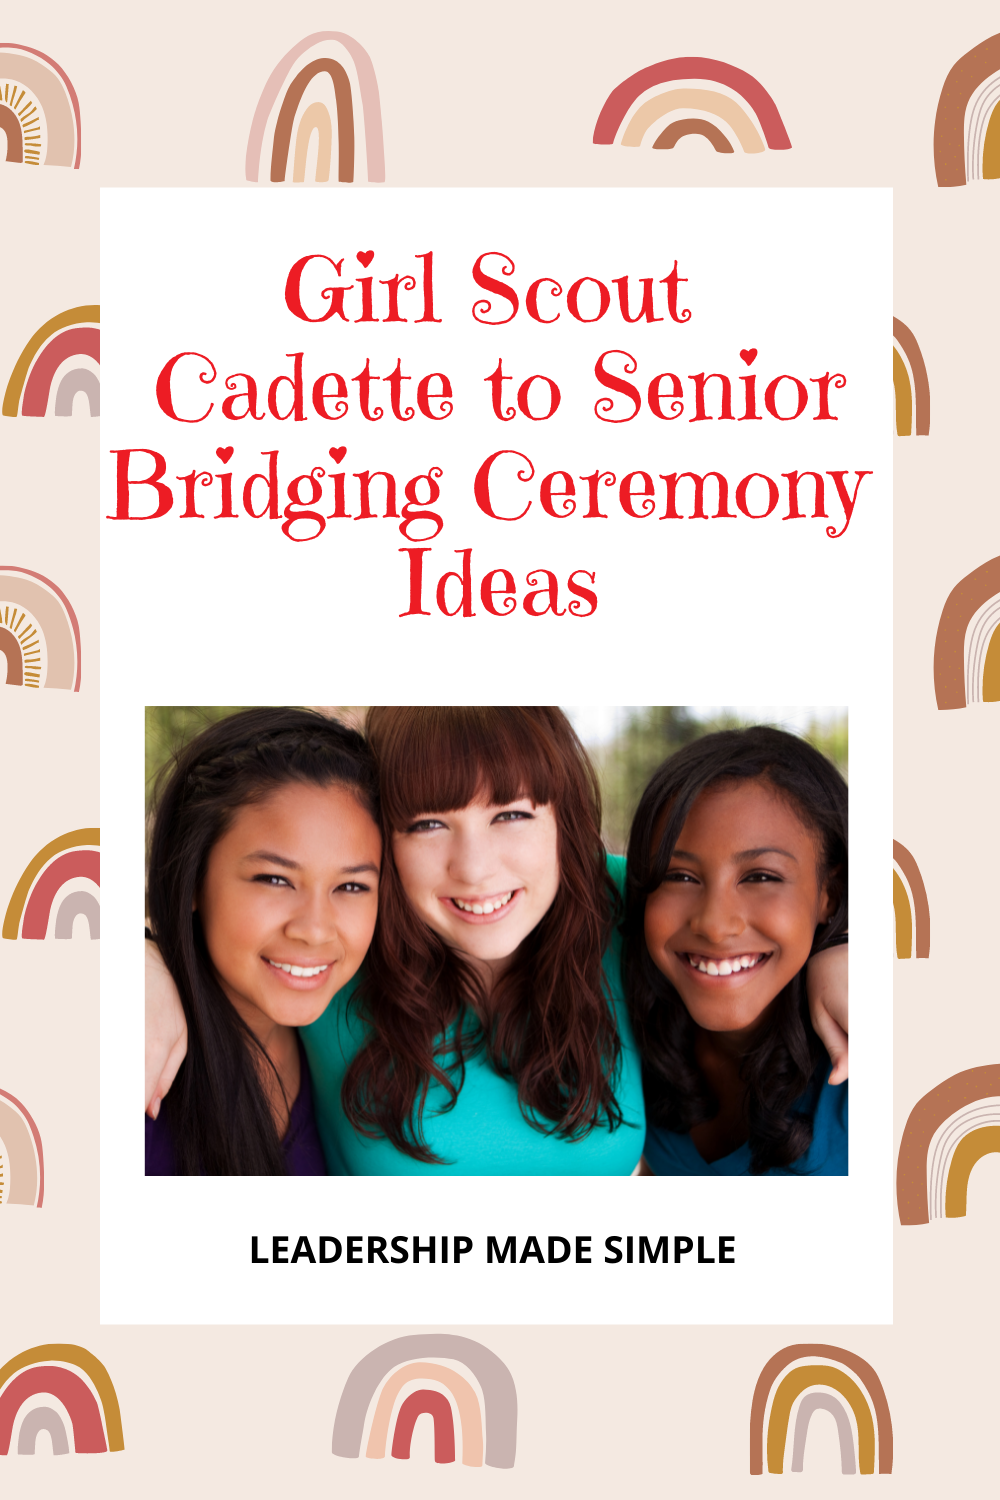 girl scout senior journey in a day 2022